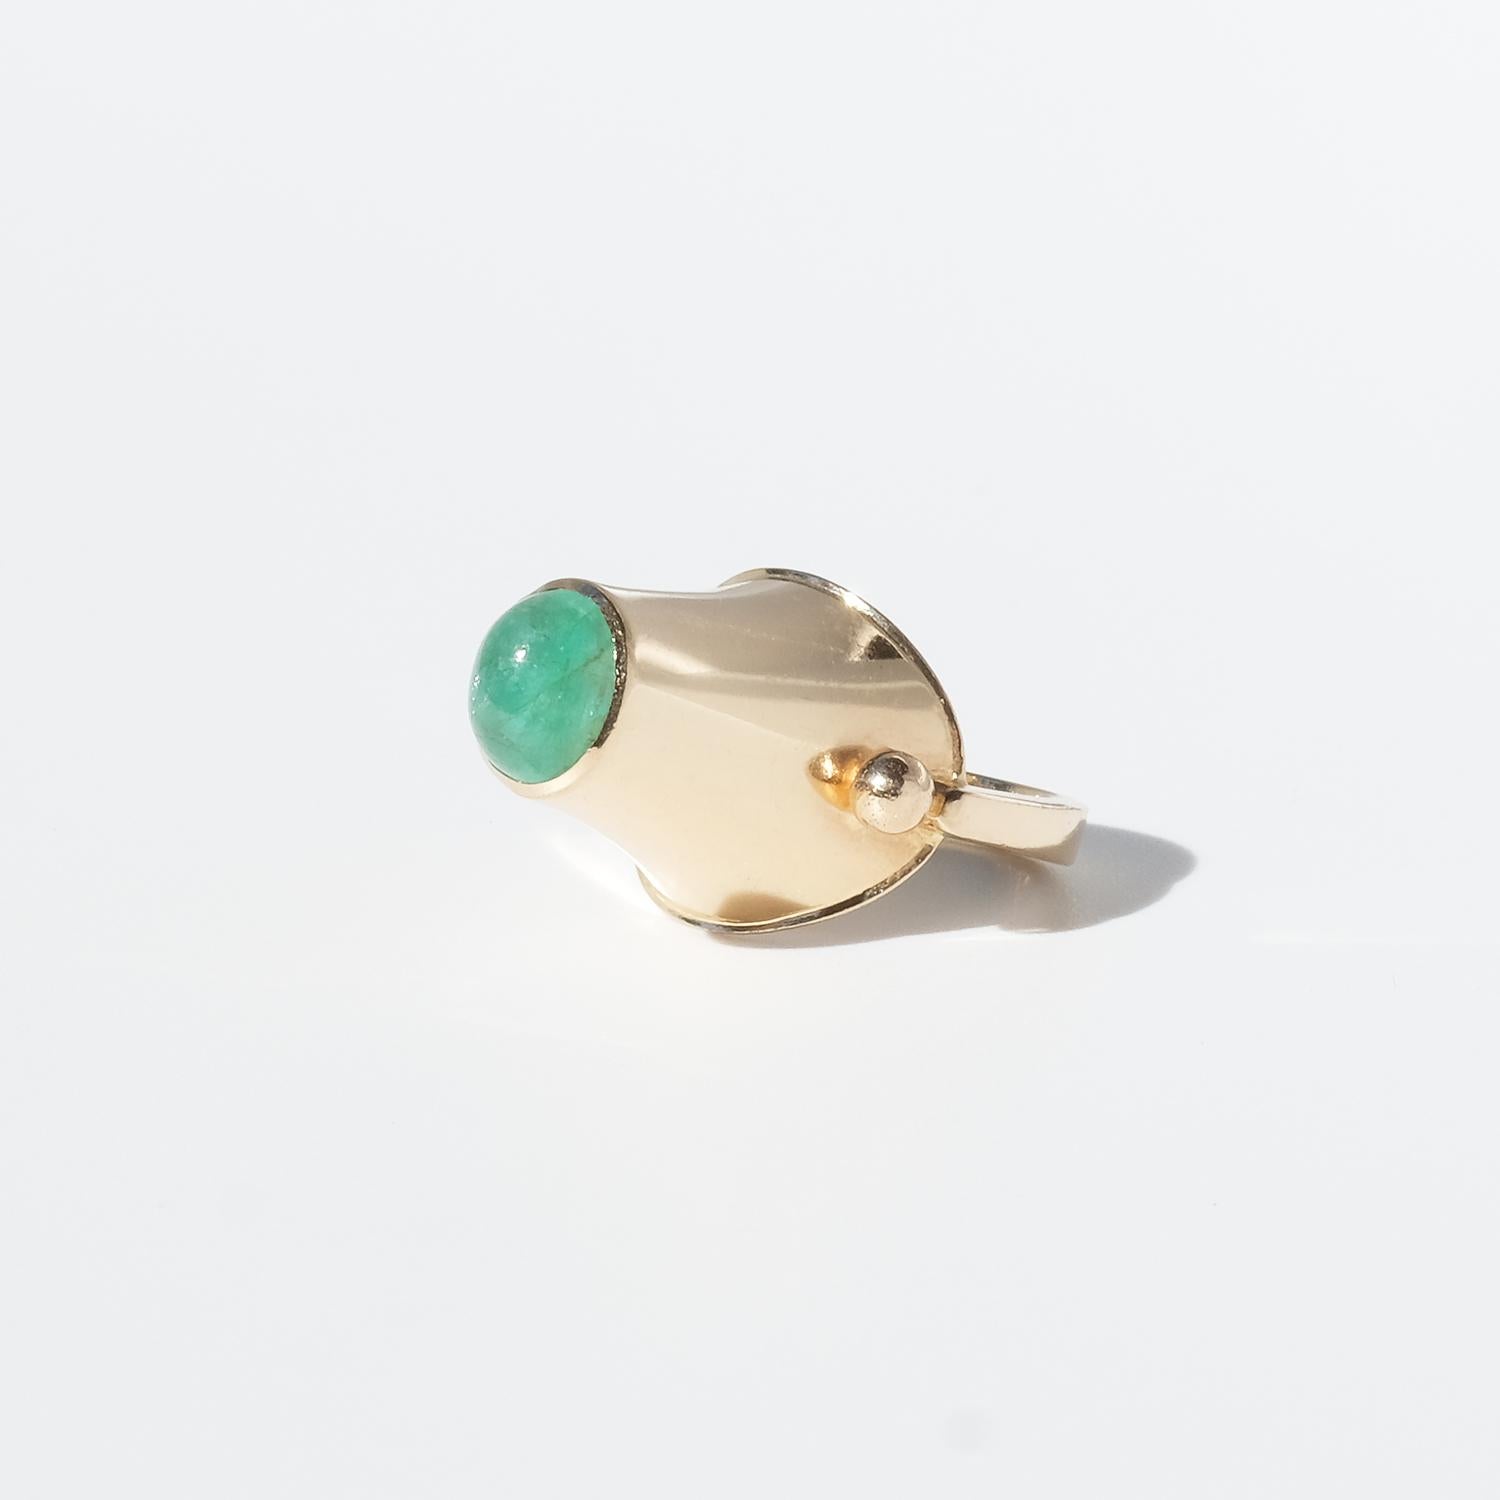 Swedish 18 K Gold Ring with an Emerald Made in 1966, Sigurd Persson 2